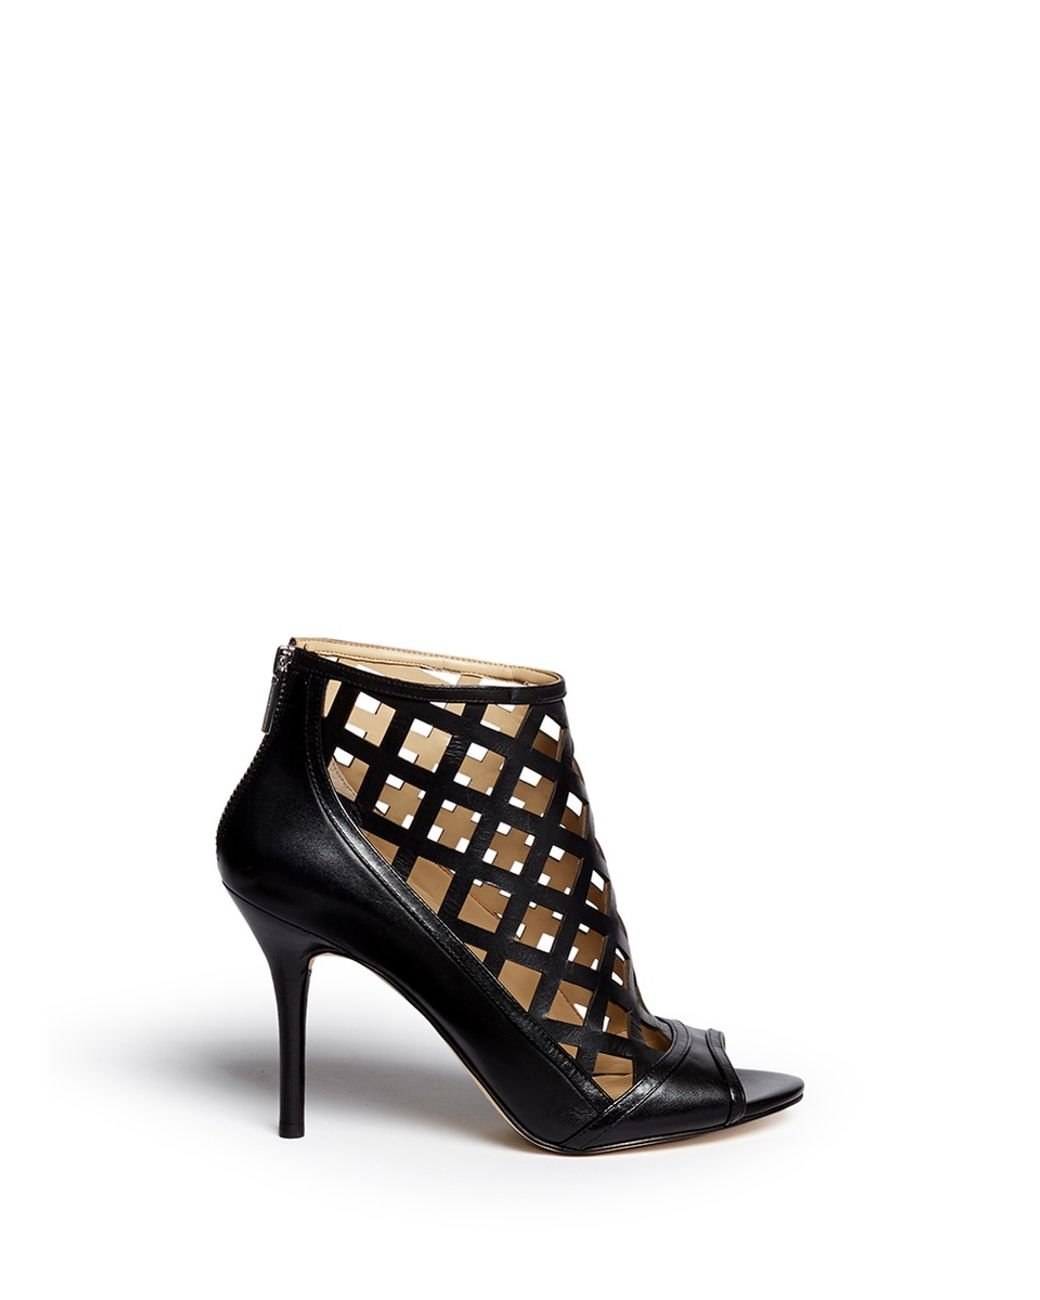 Michael Kors 'yvonne' Cutout Leather Open Toe Caged Booties in Black | Lyst